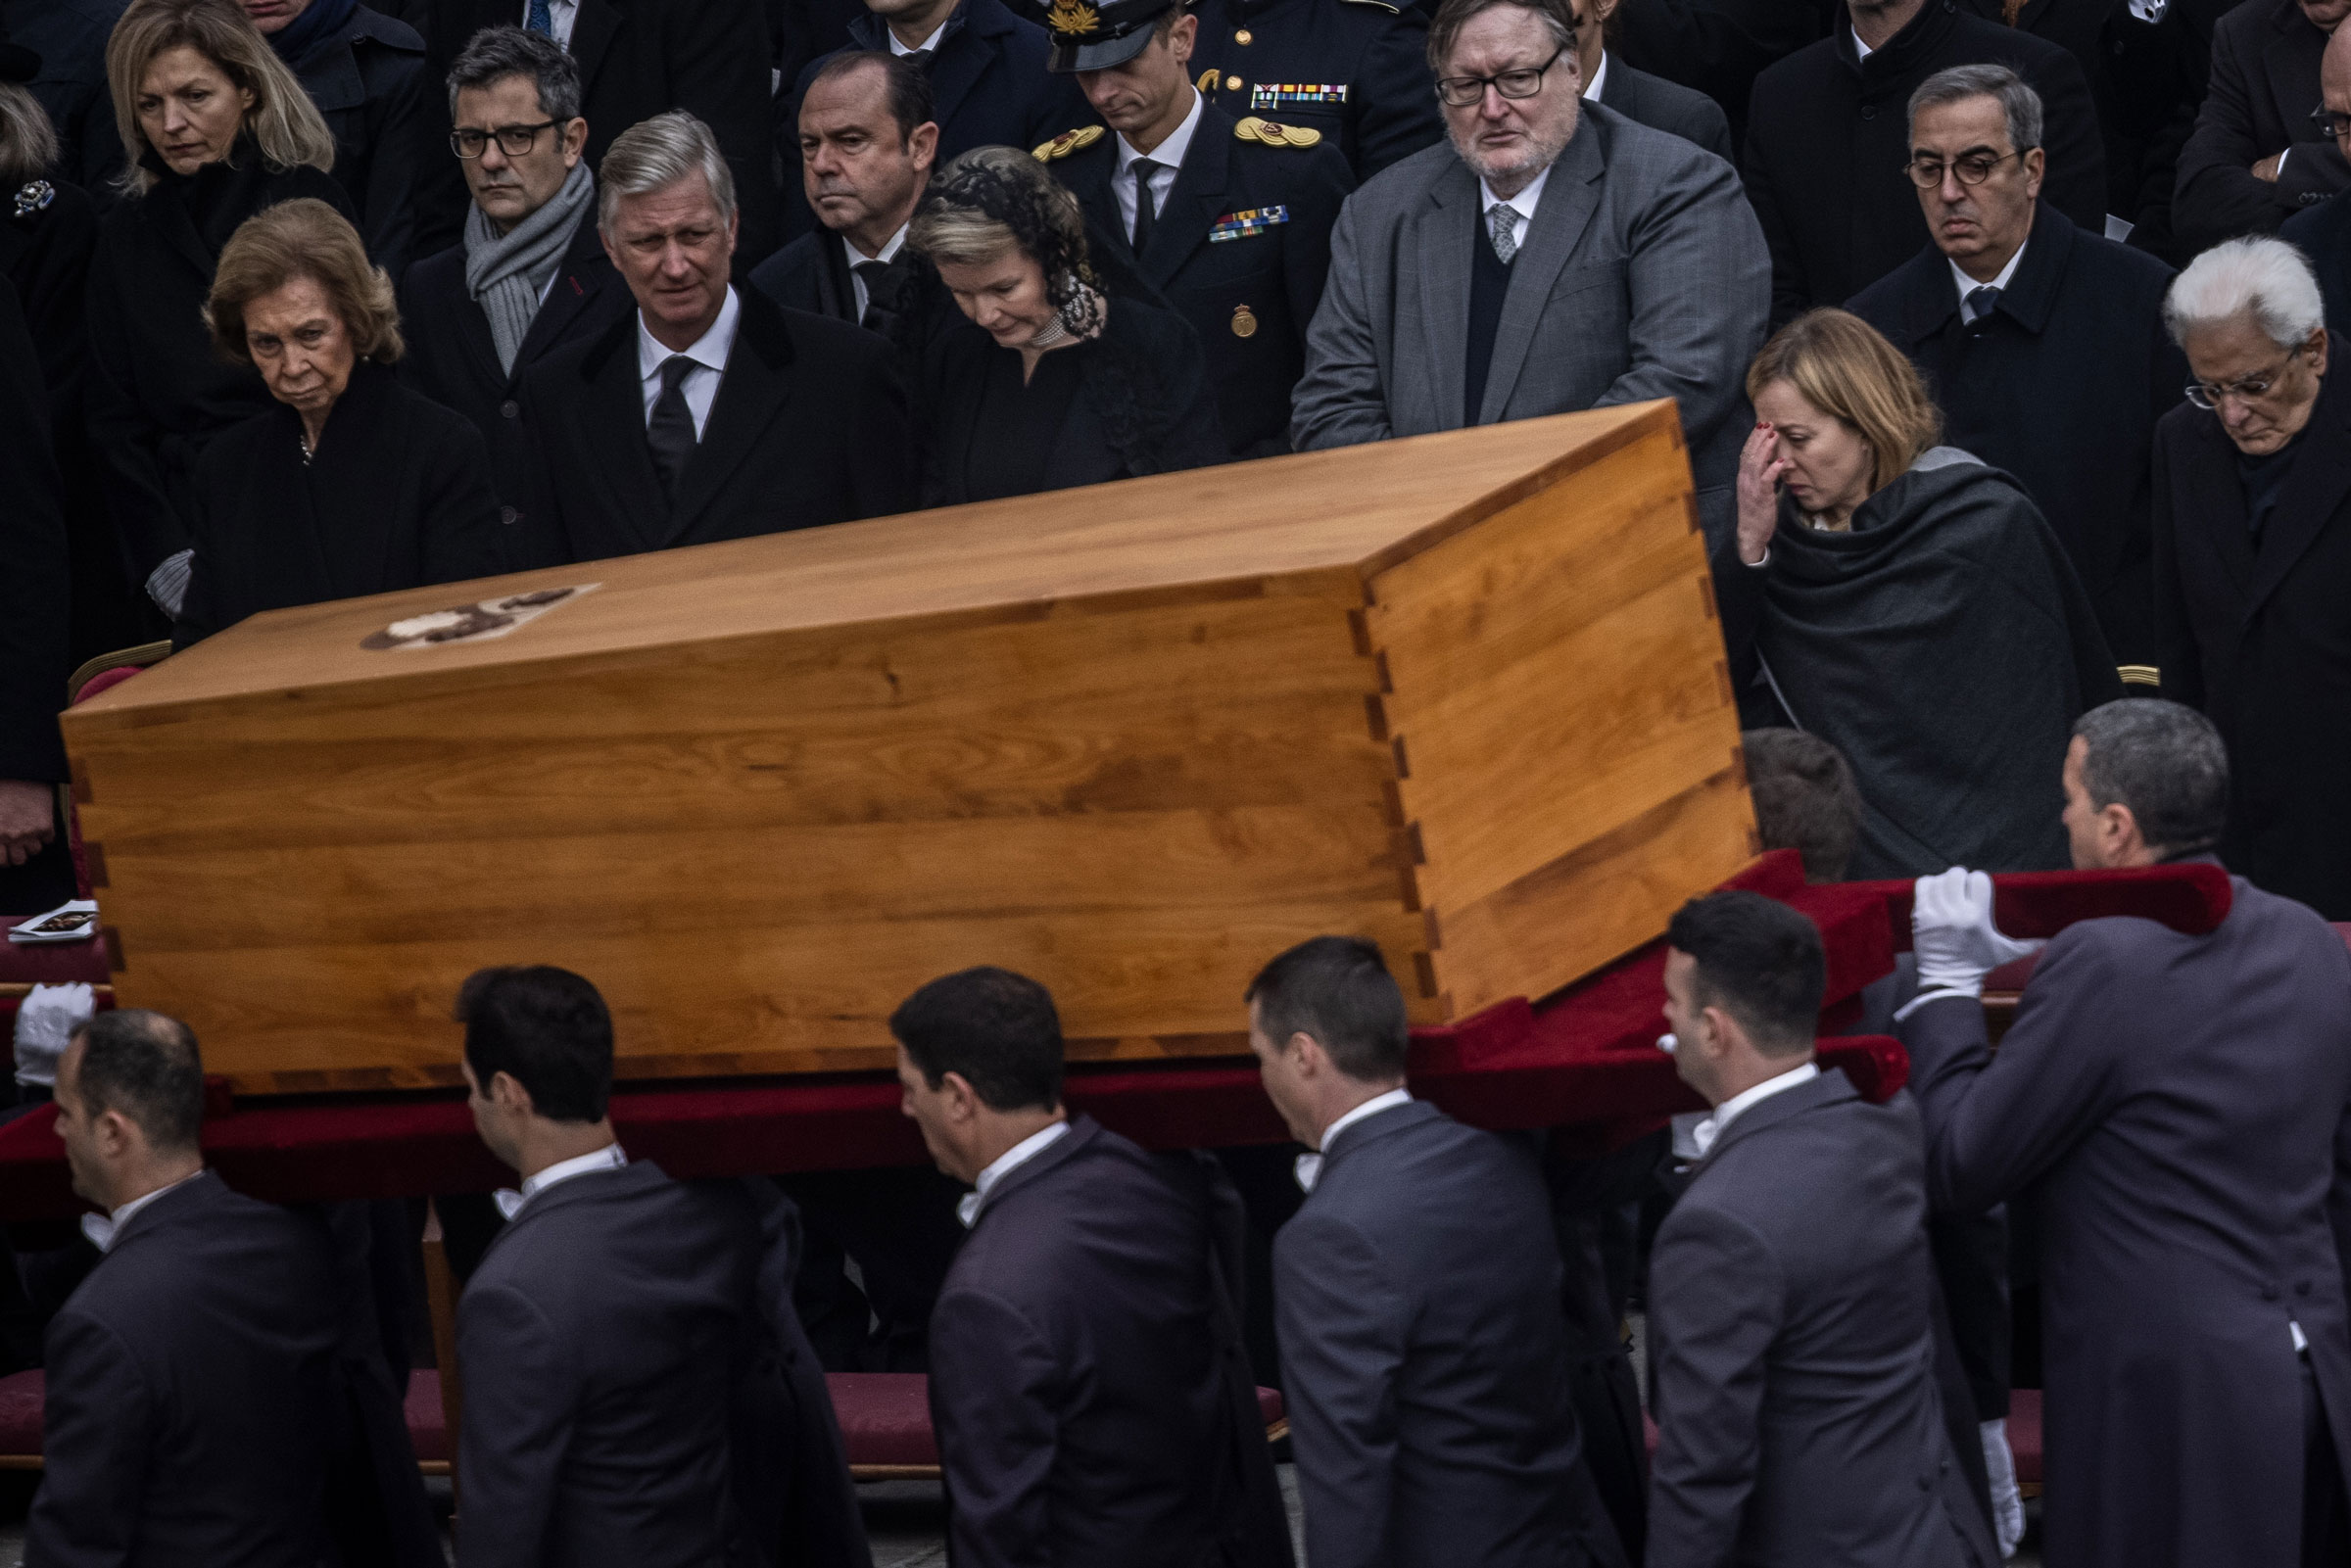 Pallbearers carry away the coffin of the late Pope Emeritus Benedict XVI after the public funeral Mass for Pope Emeritus Benedict XVI in St. Peter’s Square on Jan. 5, 2023. In the front row are (from left) Sofia, former Queen of Spain, King Philippe of Belgium, Queen Mathilde of Belgium, Giorgia Meloni (2nd from right), Prime Minister of Italy, Sergio Mattarella (right), President of Italy. (Oliver Weiken—dpa/picture alliance/Getty Images)